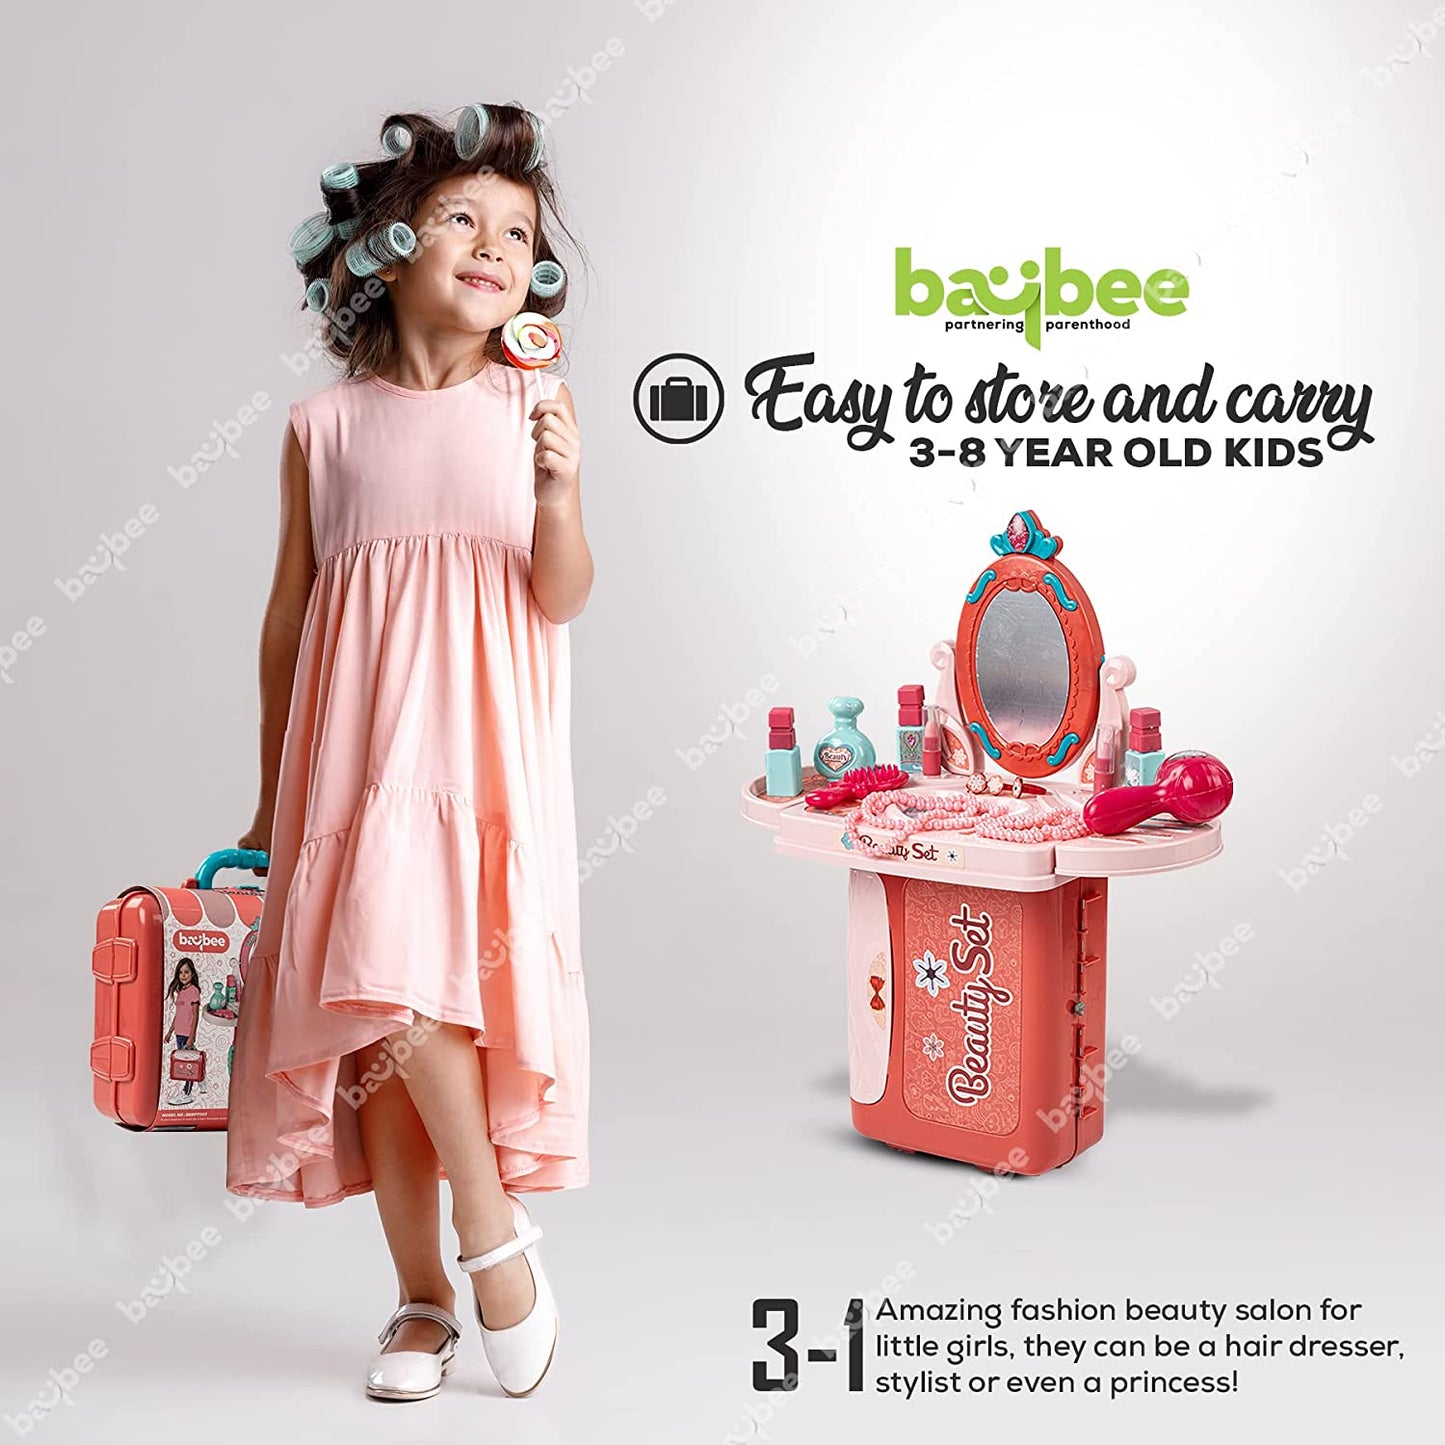 Baybee 3 in 1 Kids Beauty Makeup Kit Set Toys for Girls, Convertible Dressing Table & Suitcase